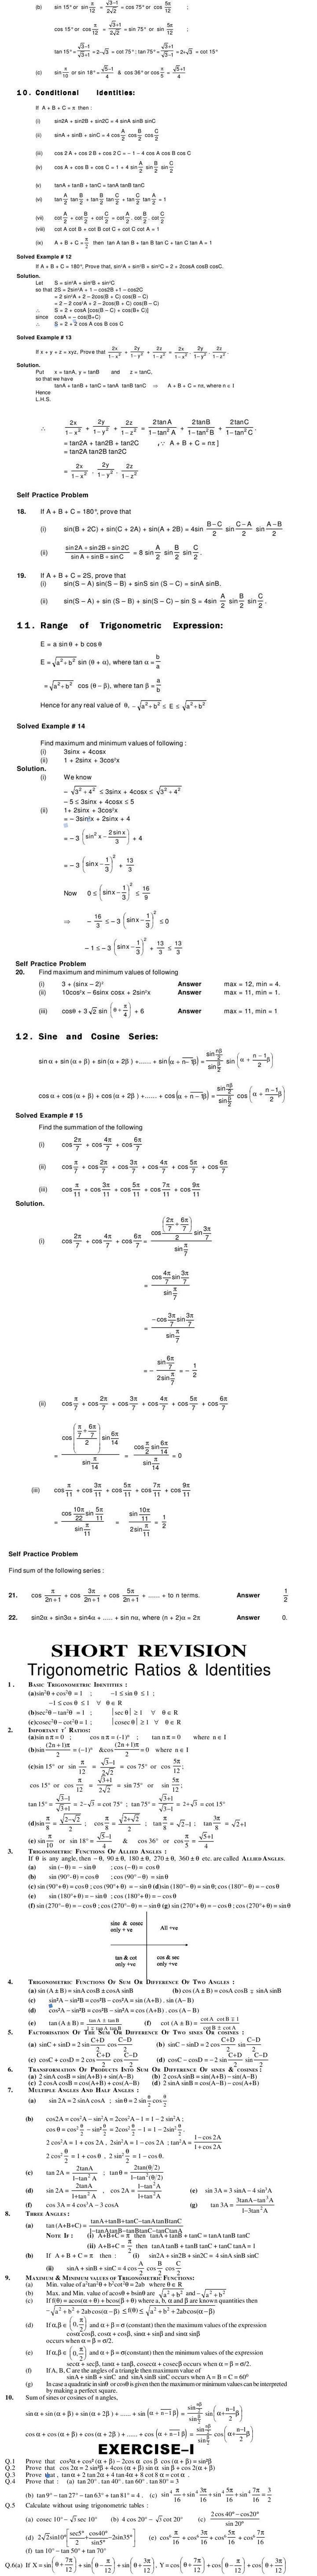 Maths Study Material - Chapter 22